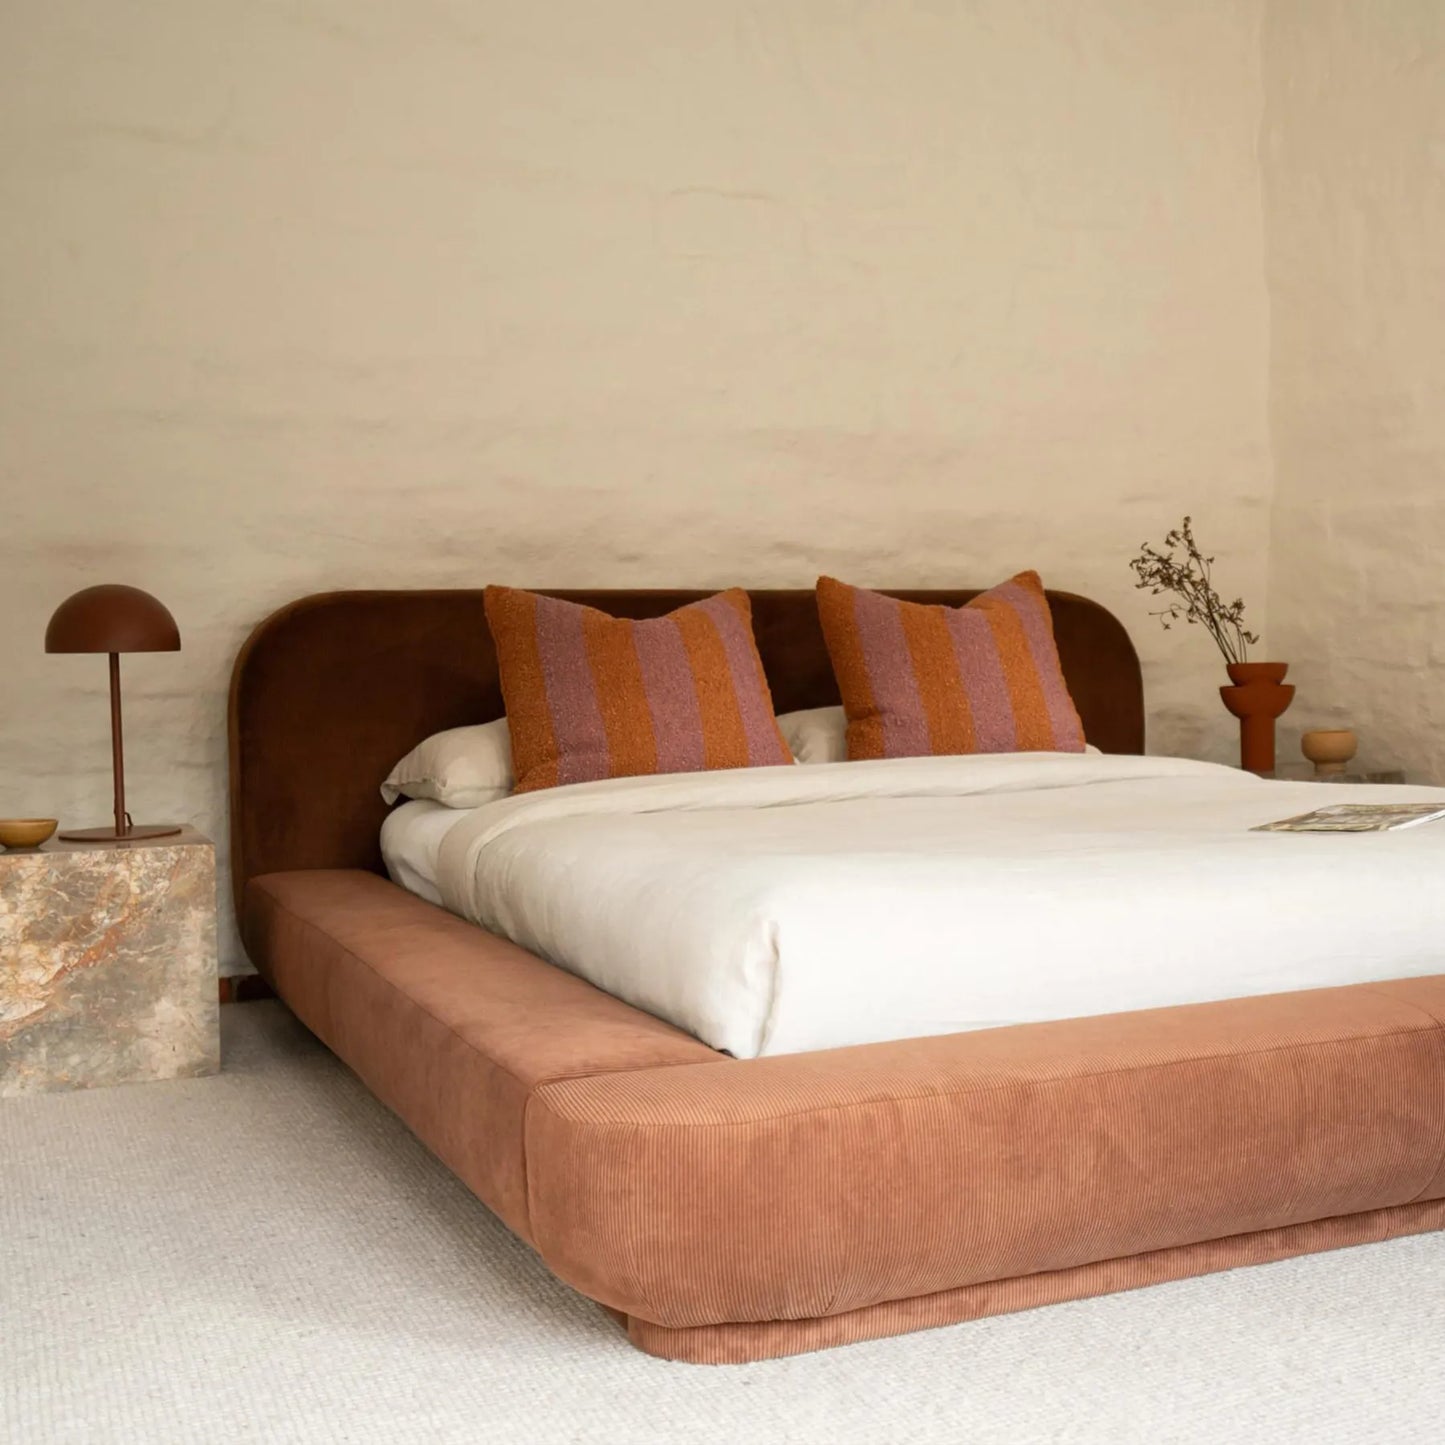 Floss King Bed - Corduroy Cocoa